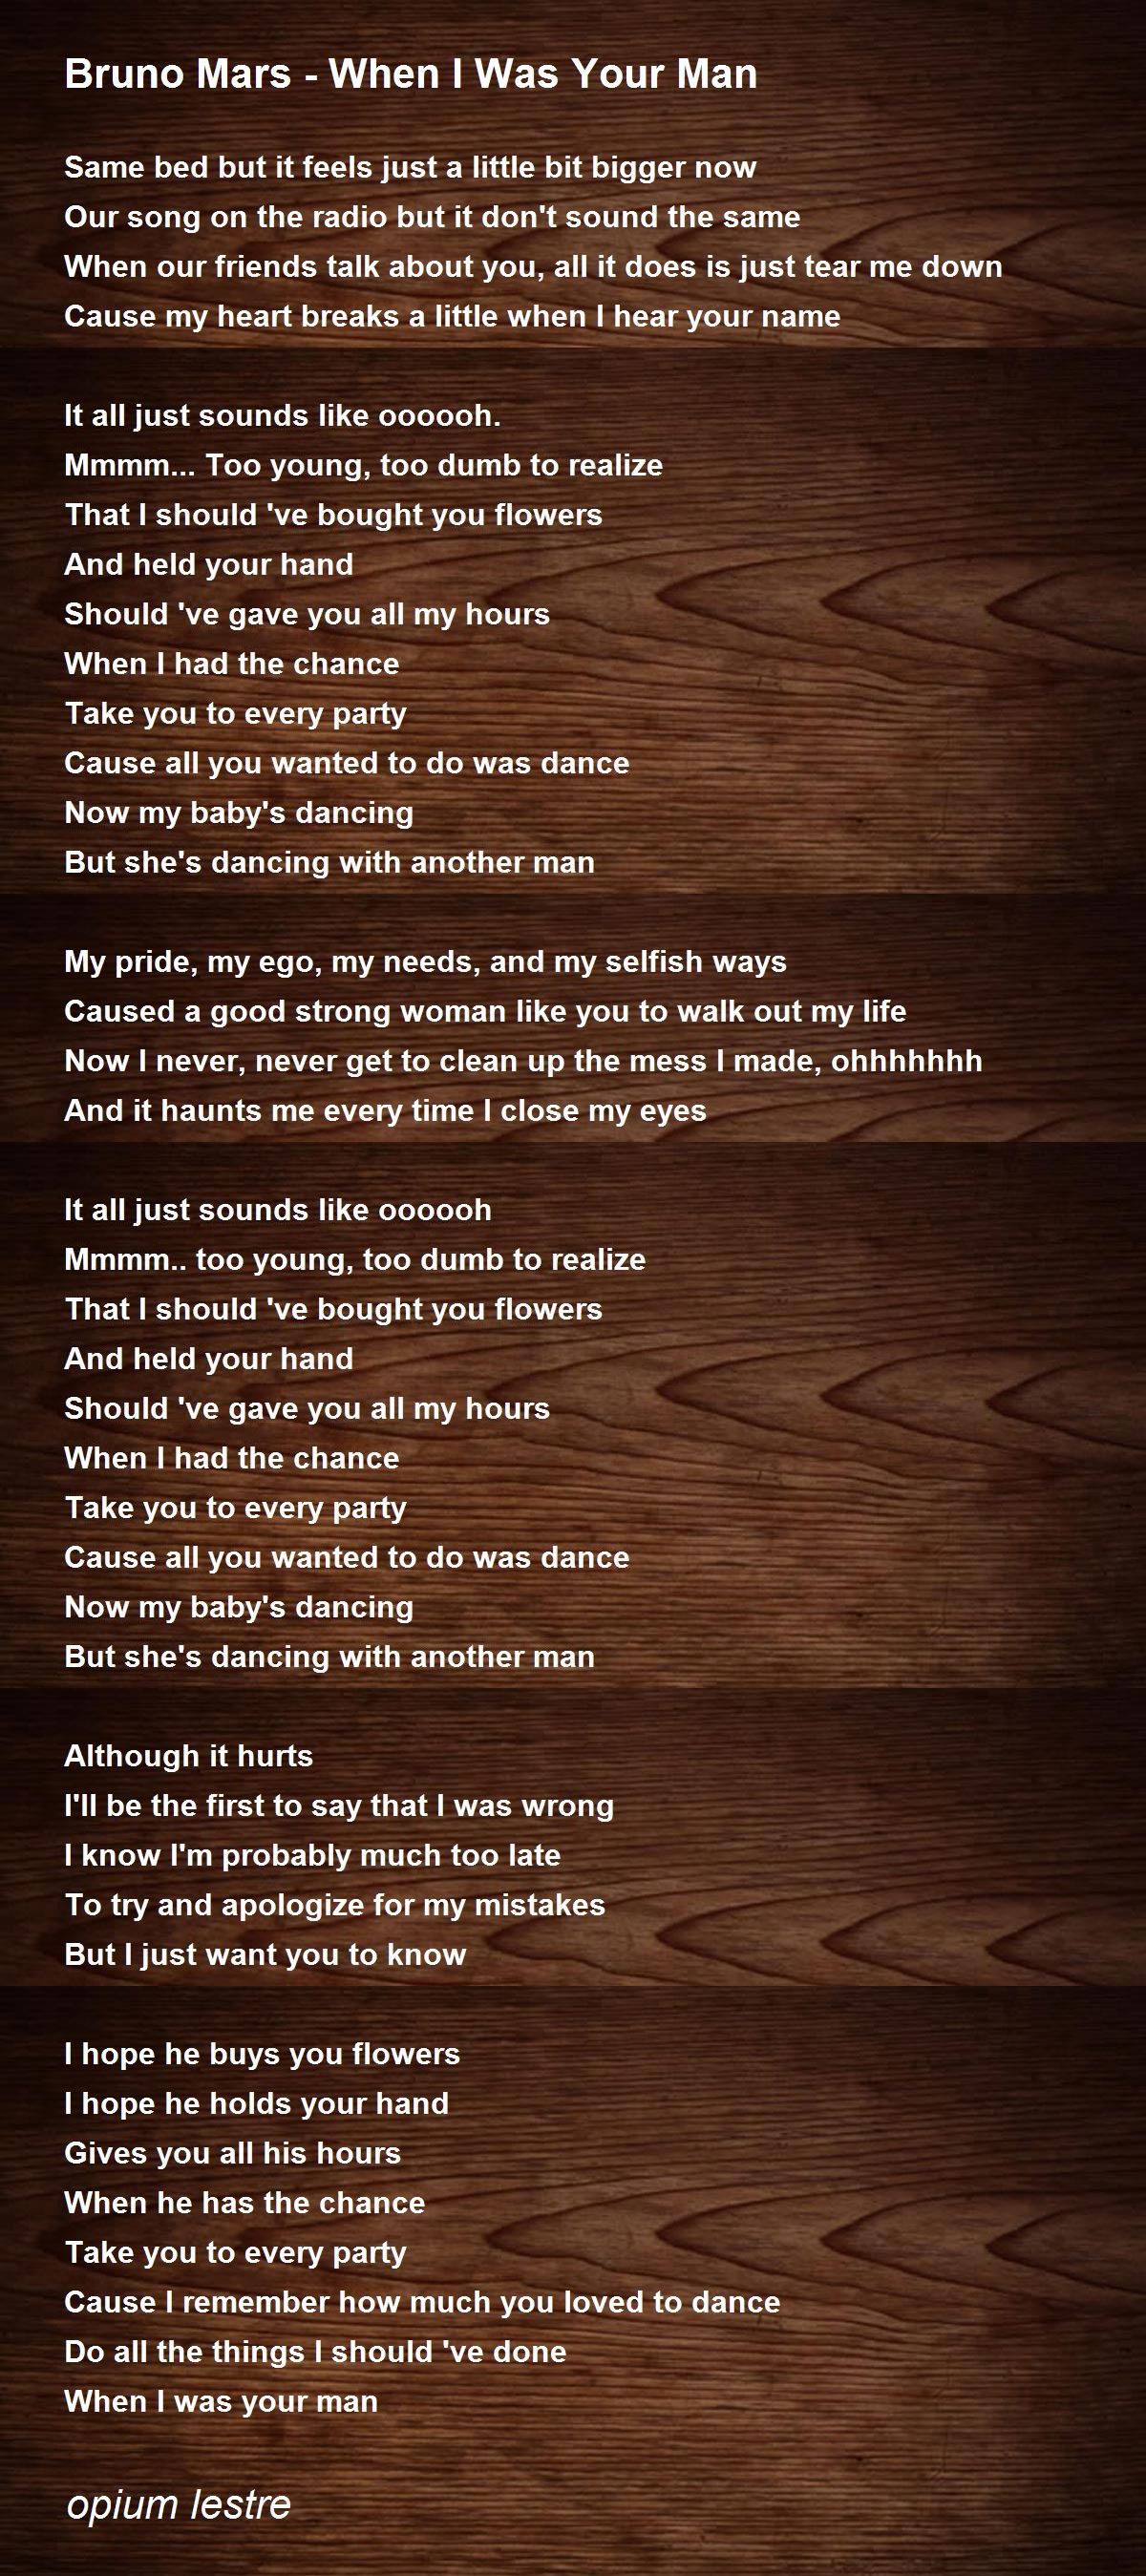 Bruno Mars's song when i was your man lyrics <3 this song so